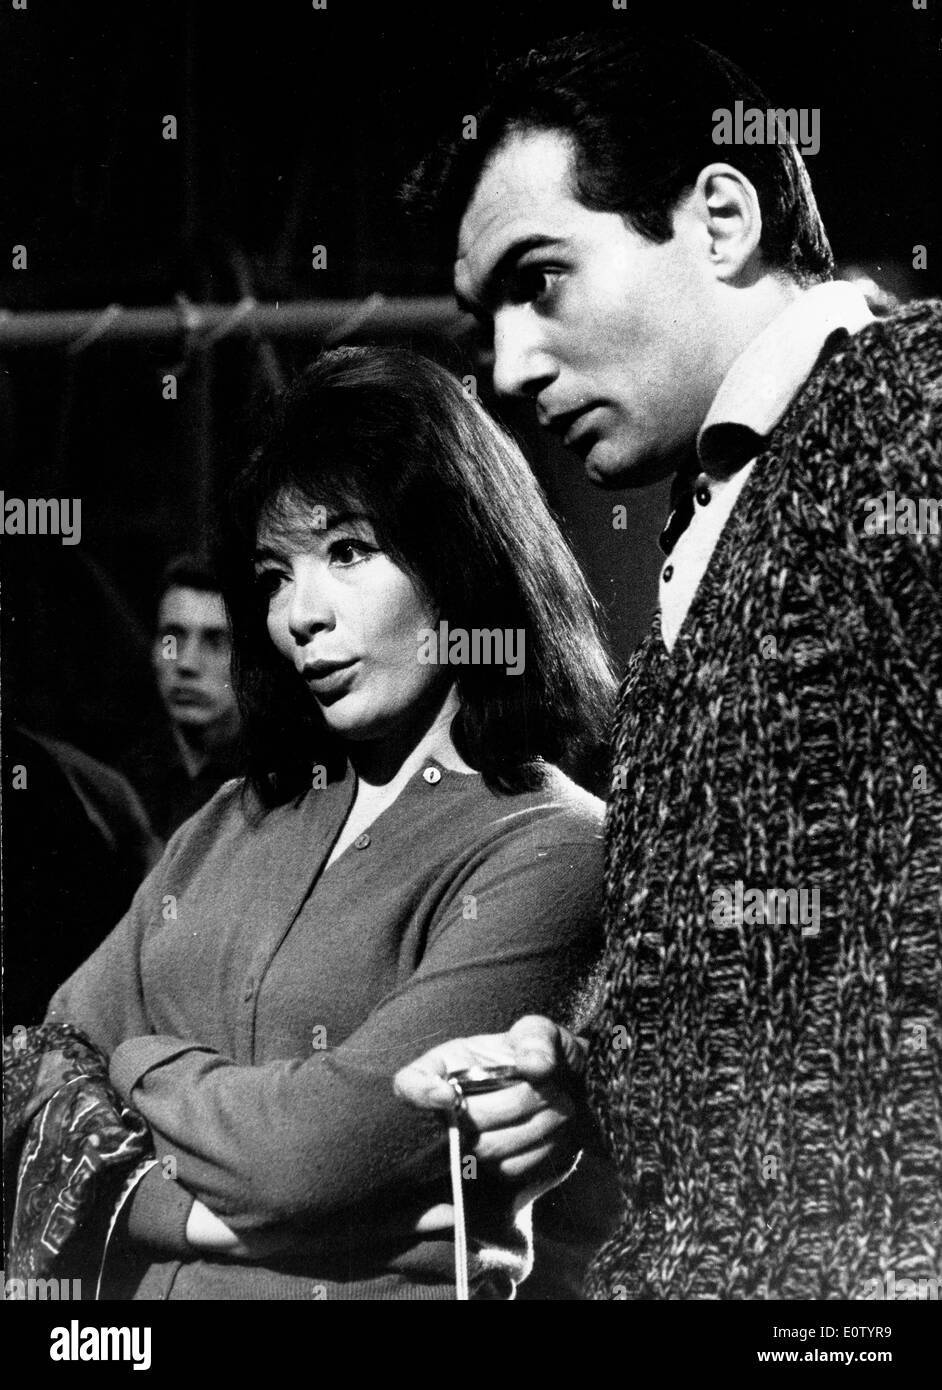 Actress Juliette Greco working Stock Photo